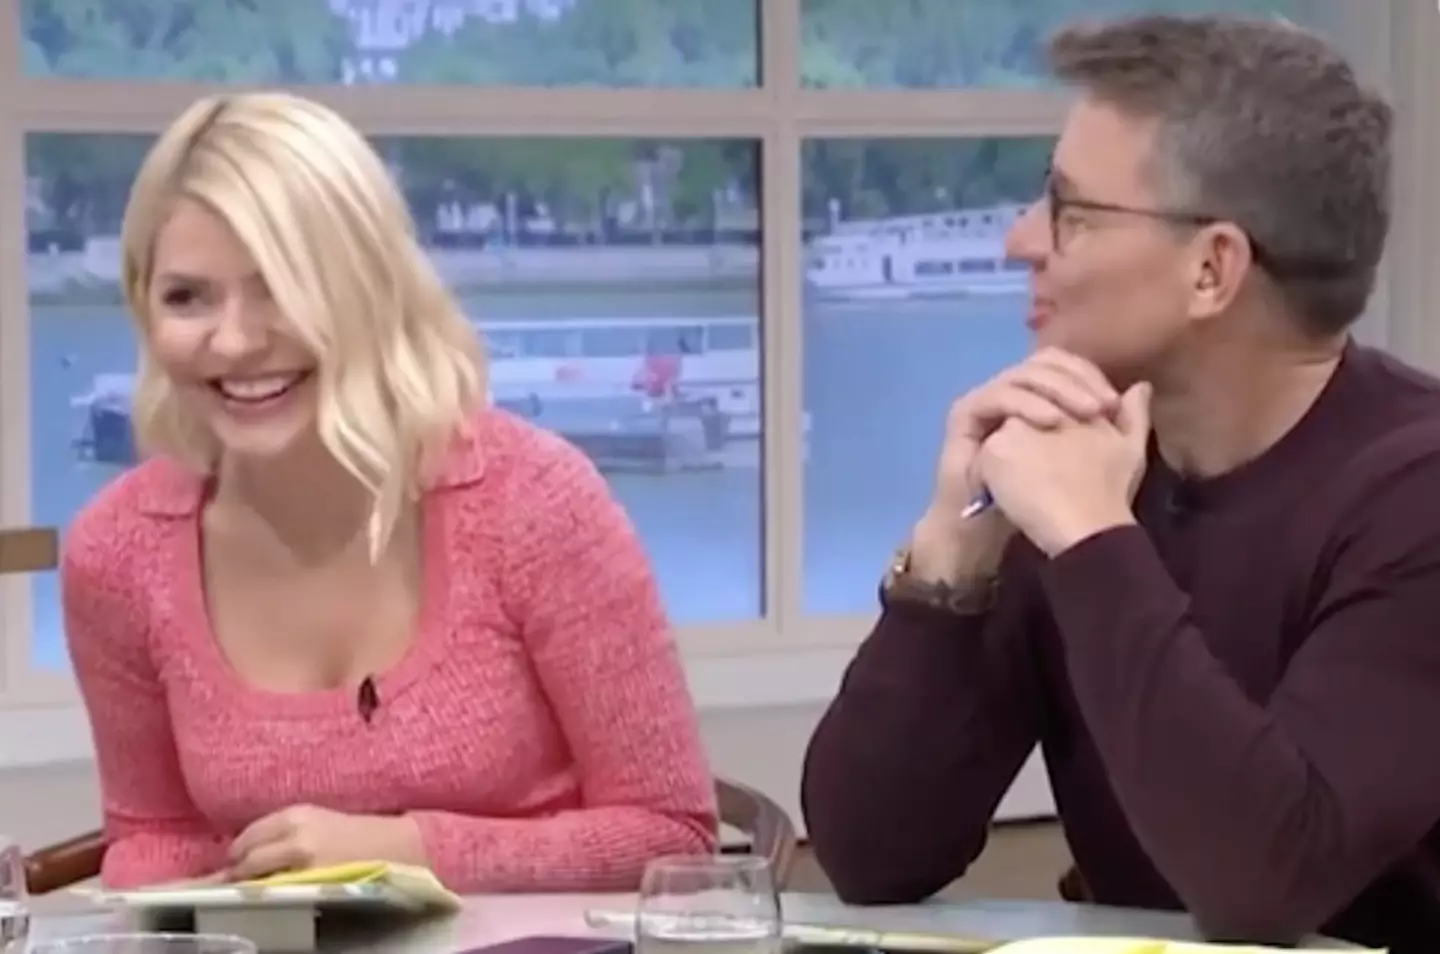 Holly Willoughby made the confession live on air.